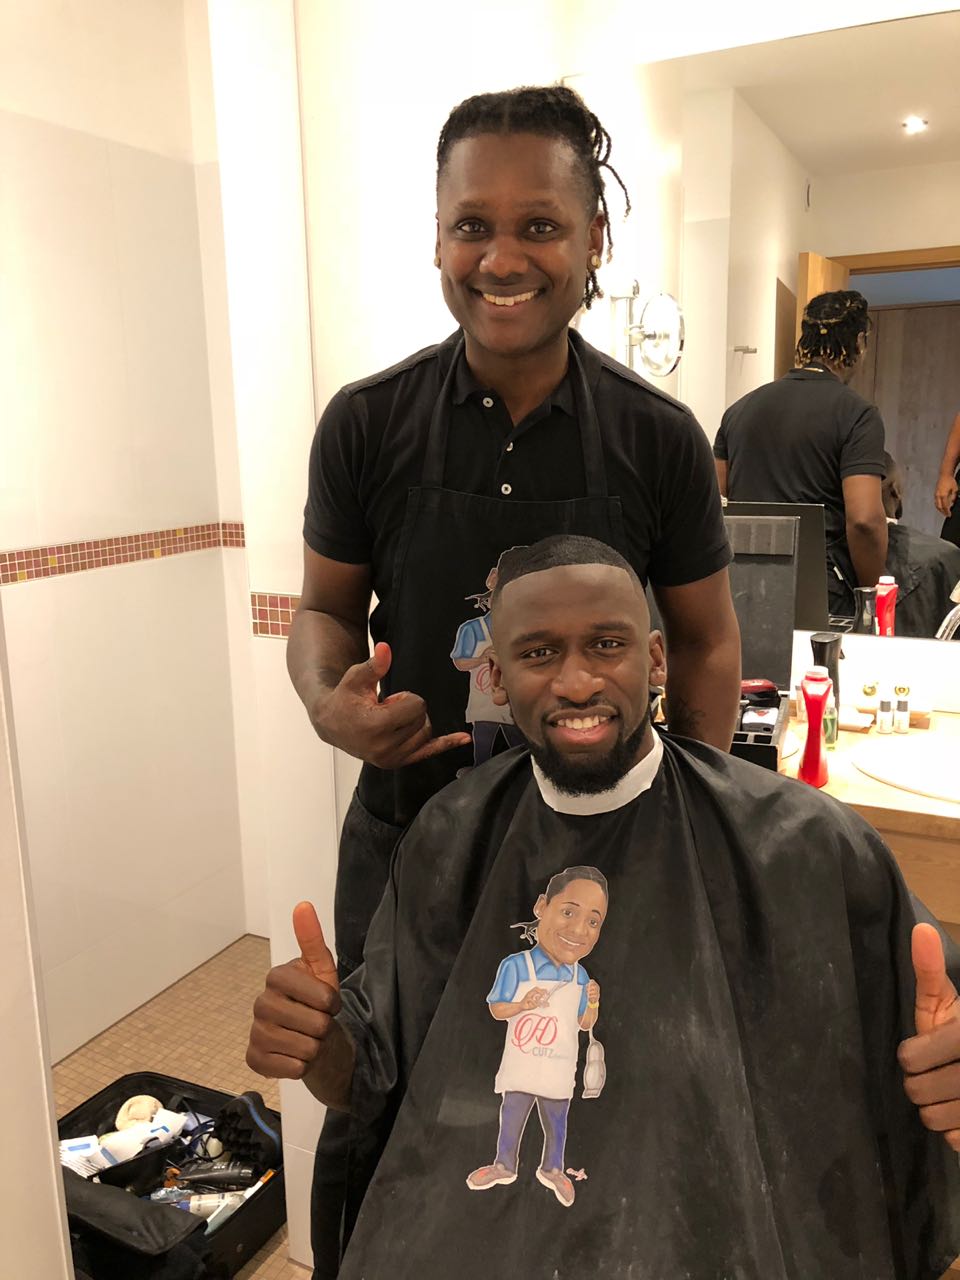 Antonio Rüdiger on X: "Hairstyle is HD ready for the training camp now   #Hustle #AlwaysBelieve #HDCutz https://t.co/OAl998H3Pb" / X